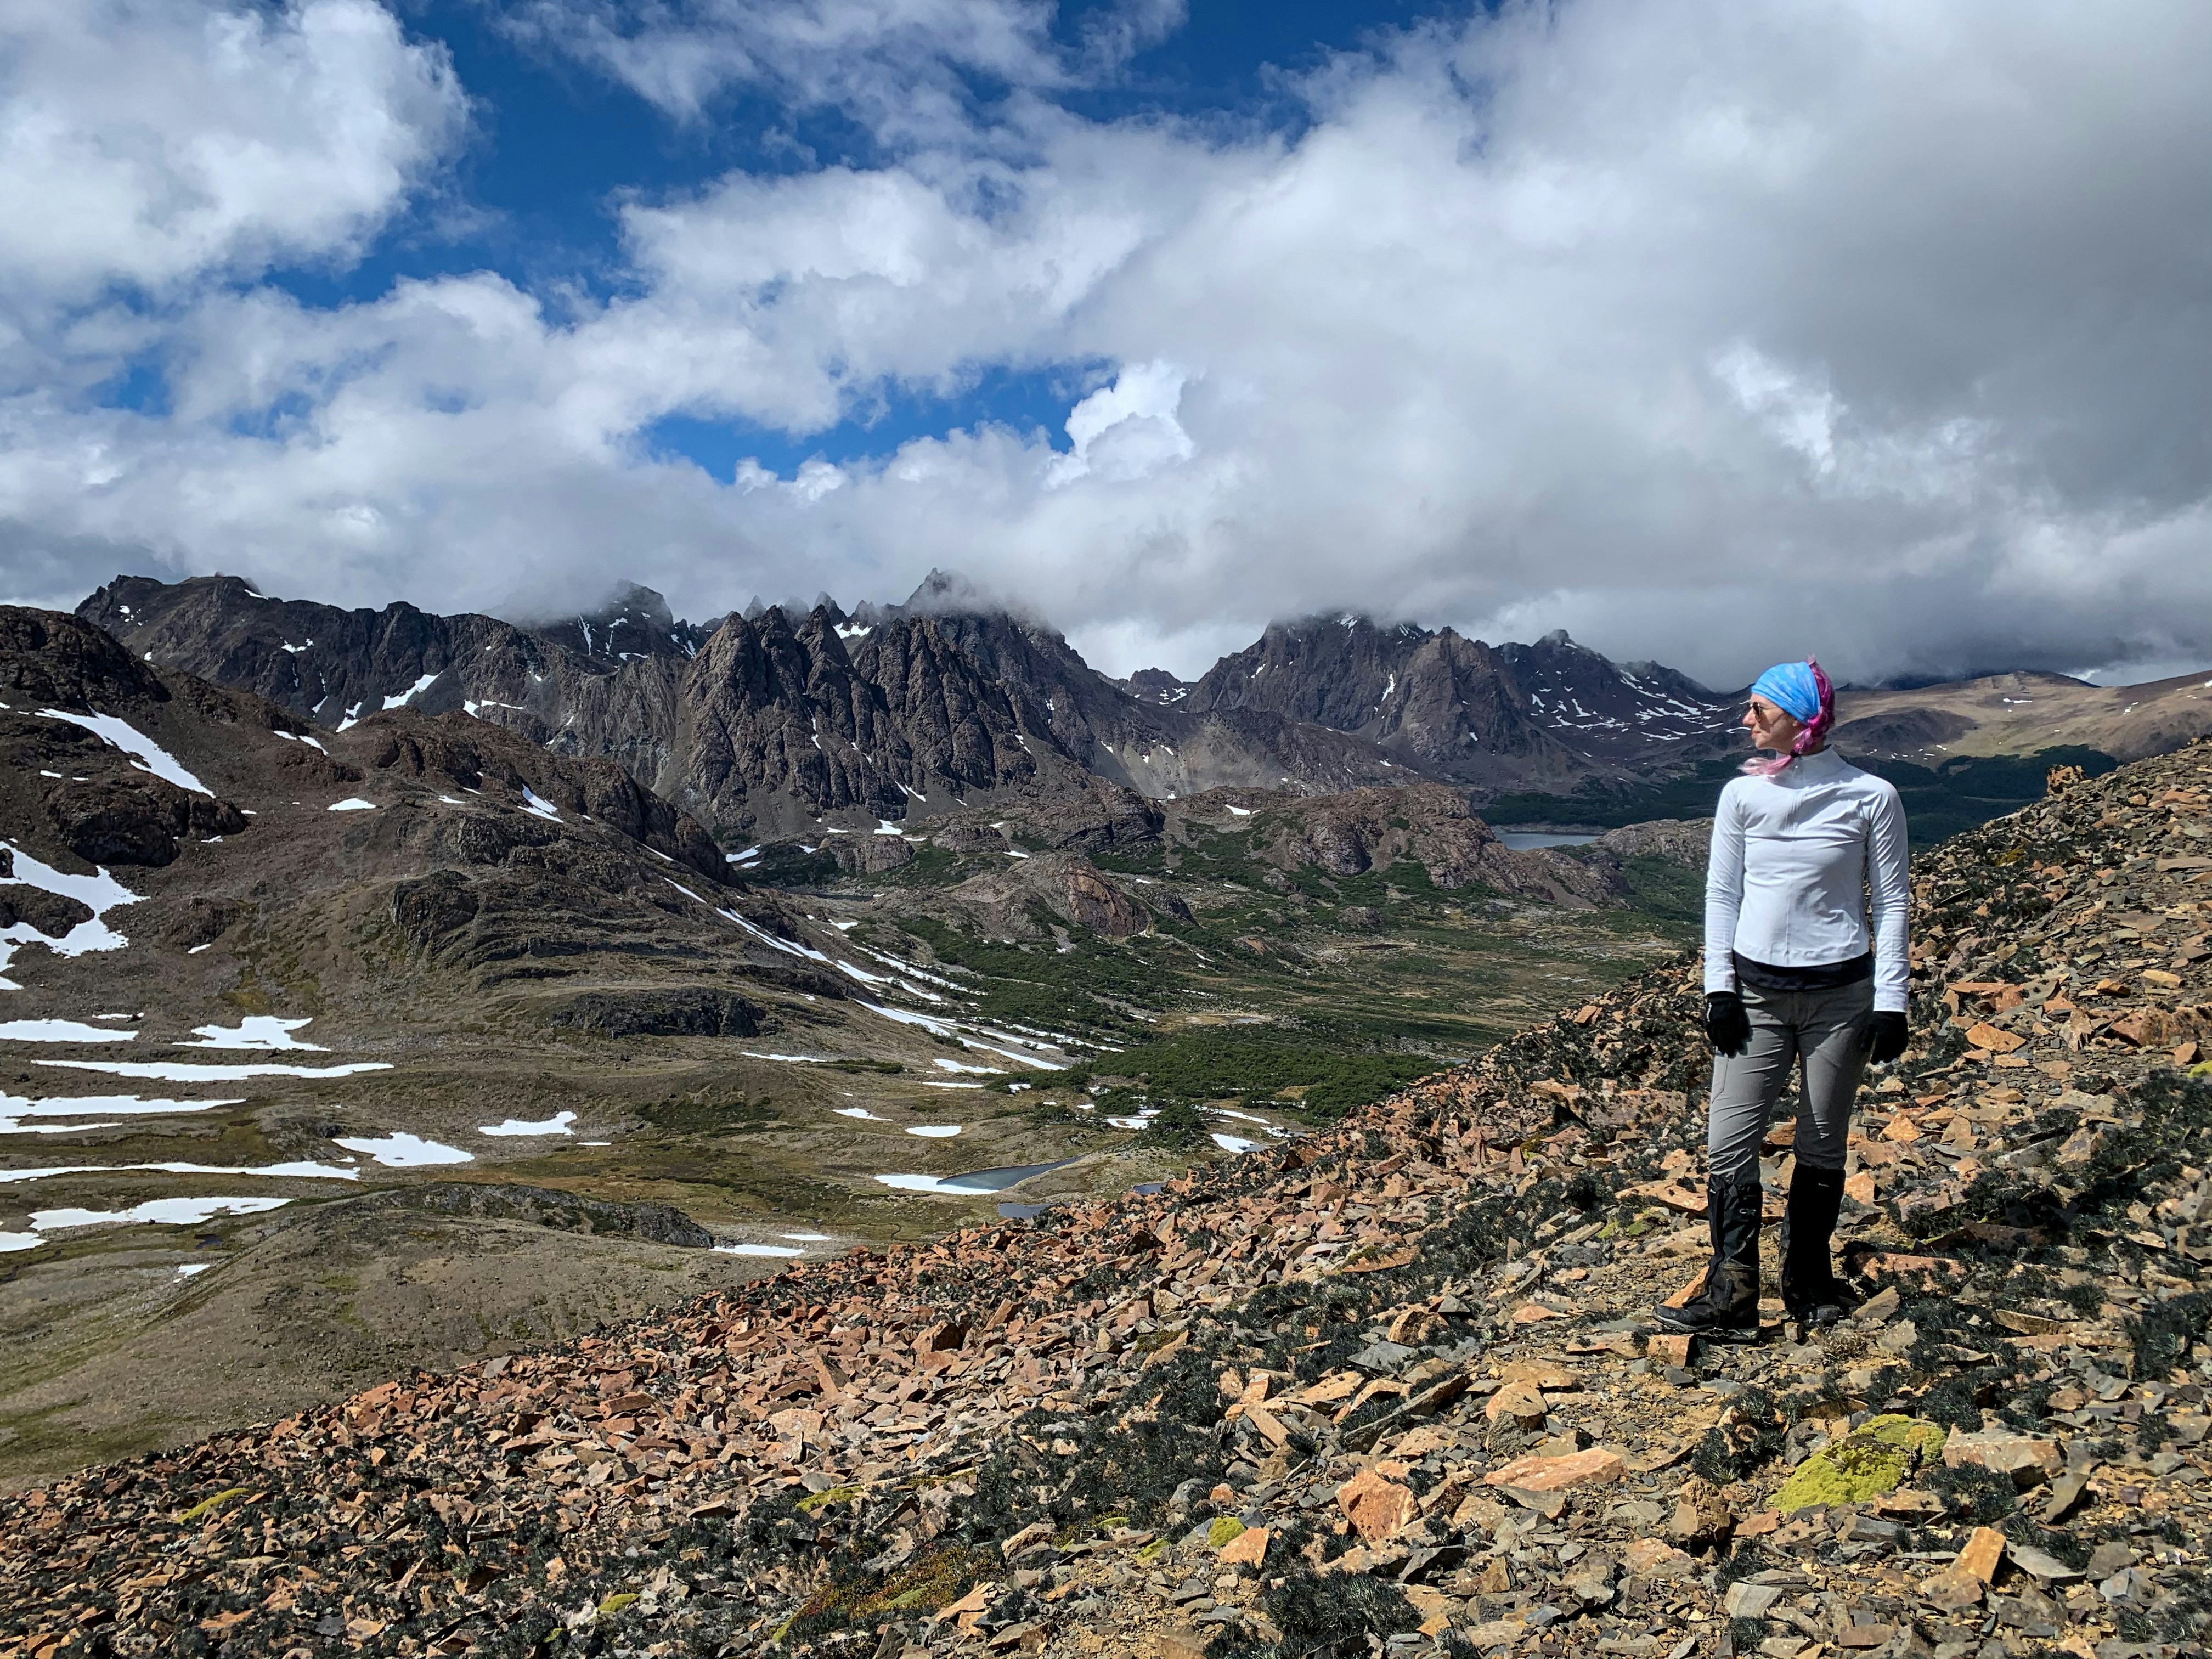 Bailey stands looking out over a rugged, almost barren landscape from Paso Ventarron on the Dientes trail.